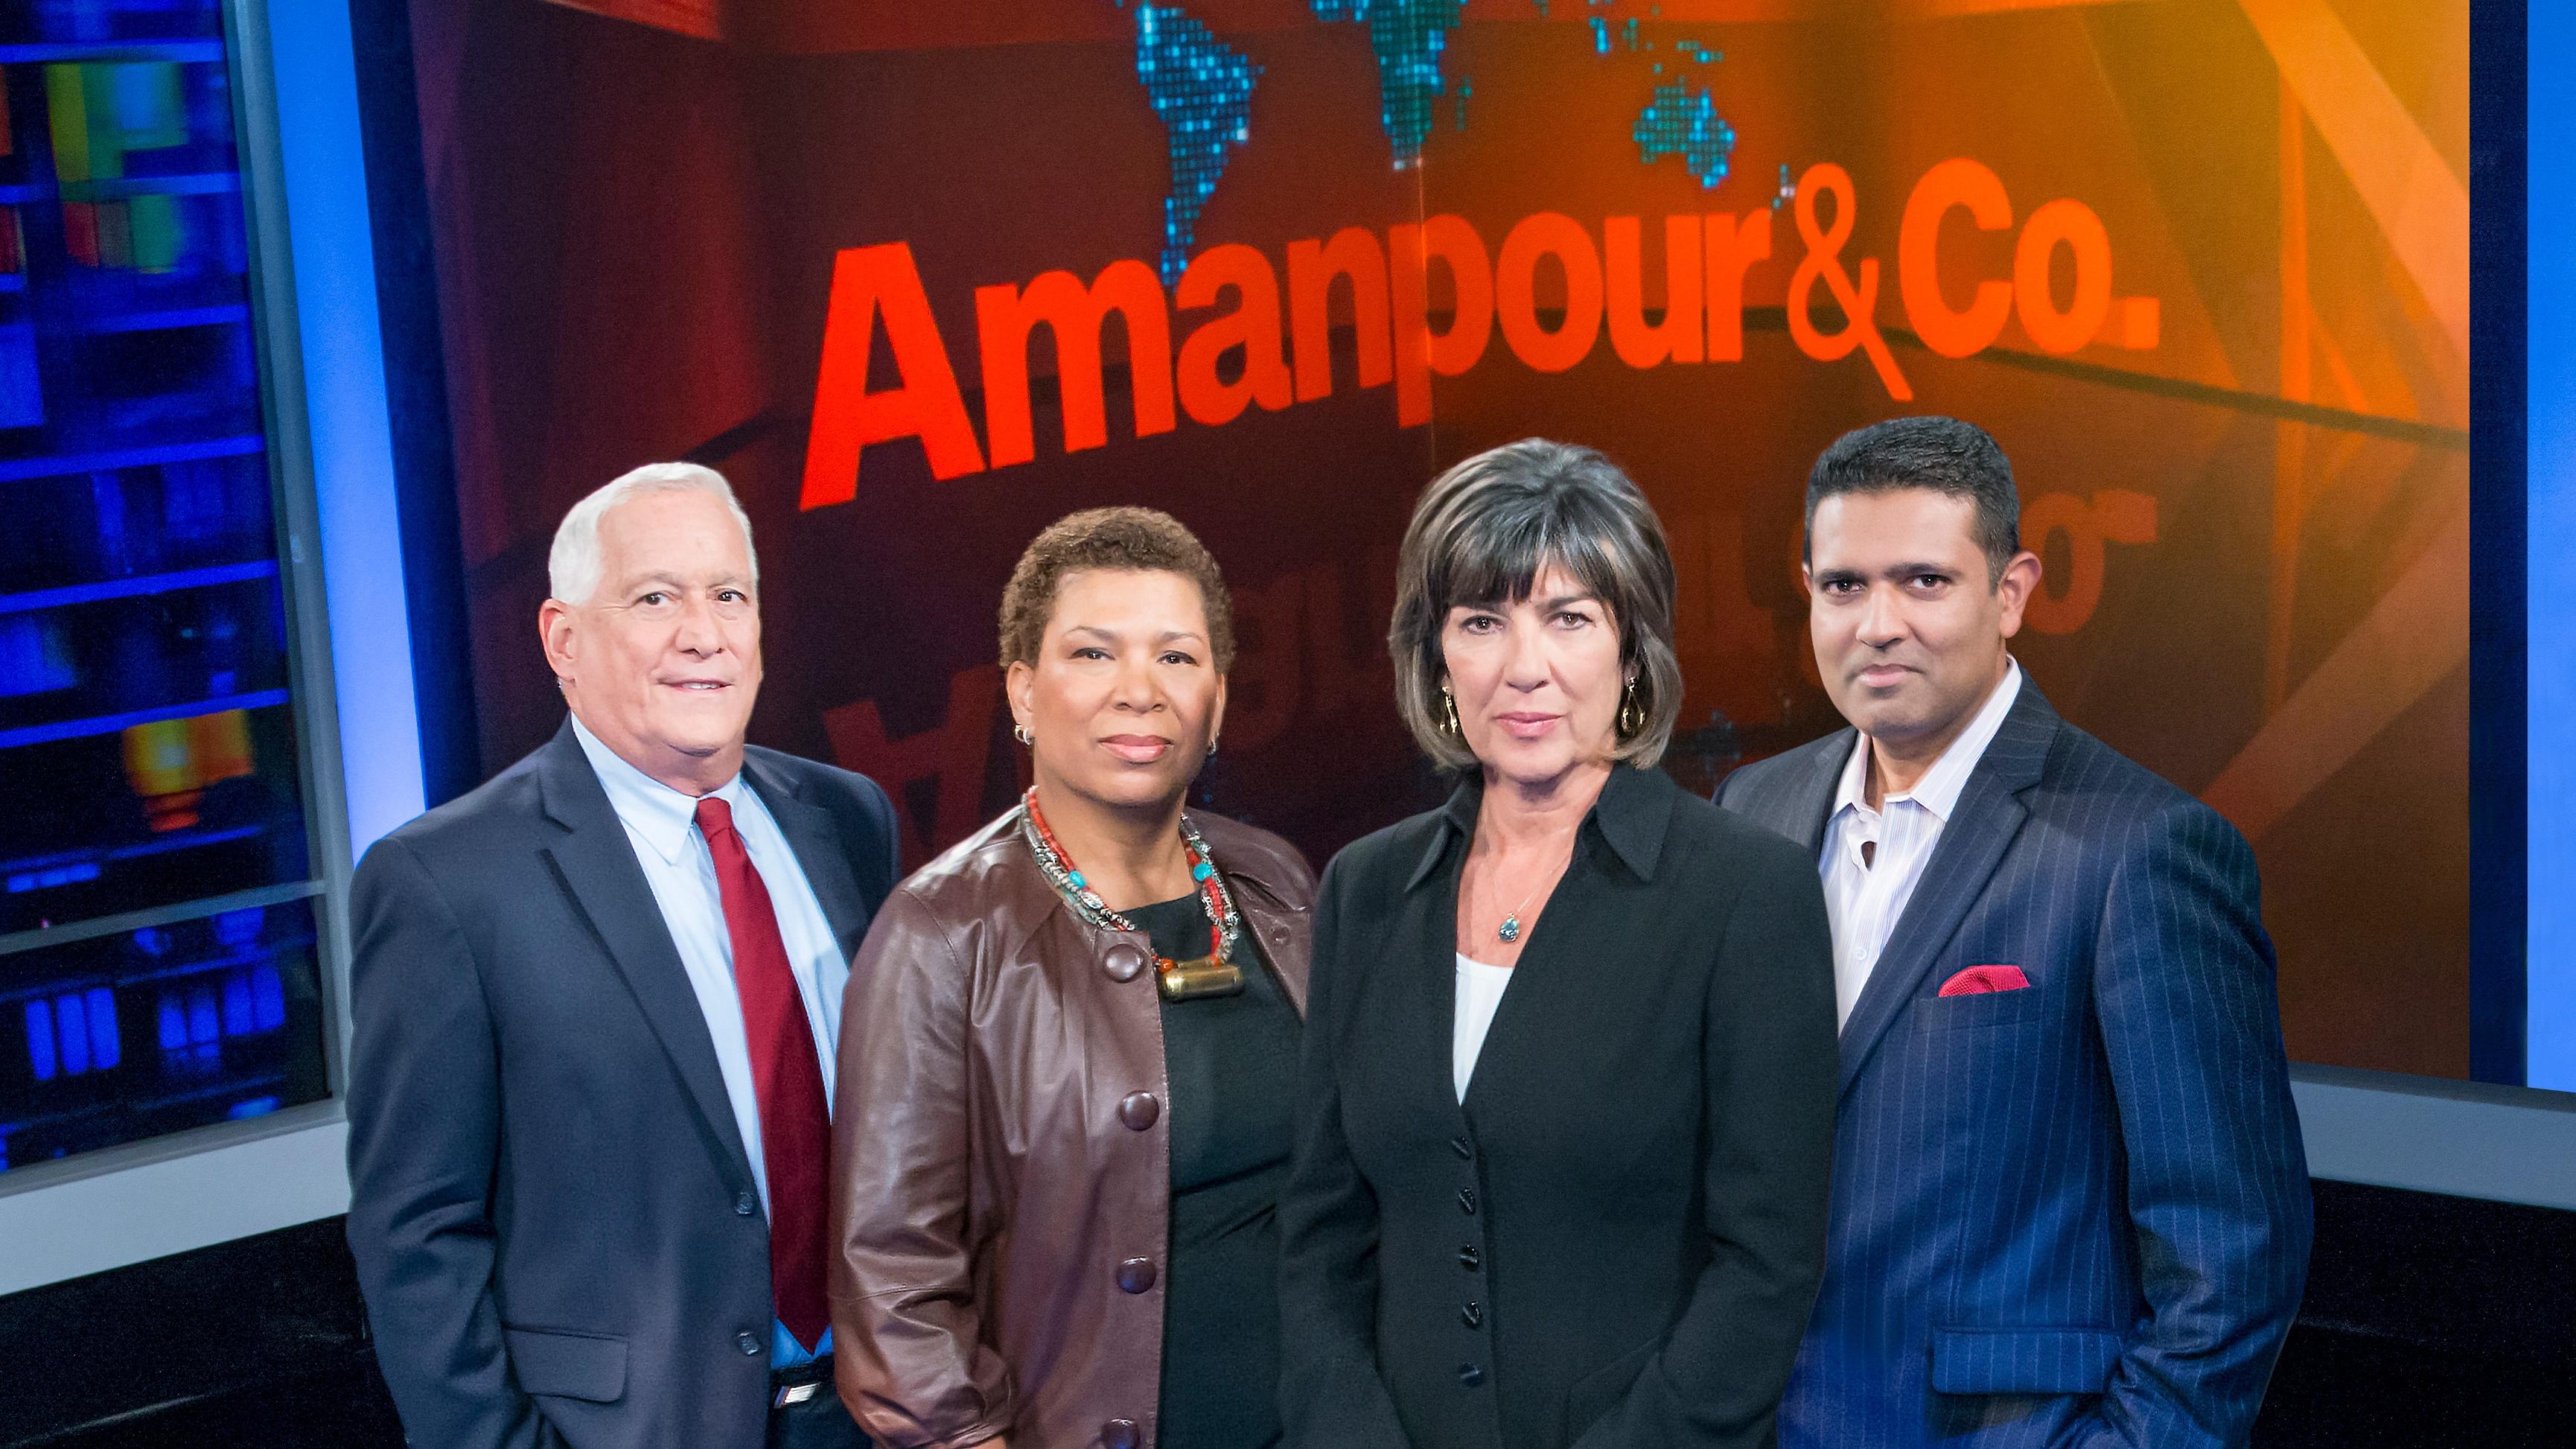 four hosts stand in front of a screen displaying the title Amanpour & Co.